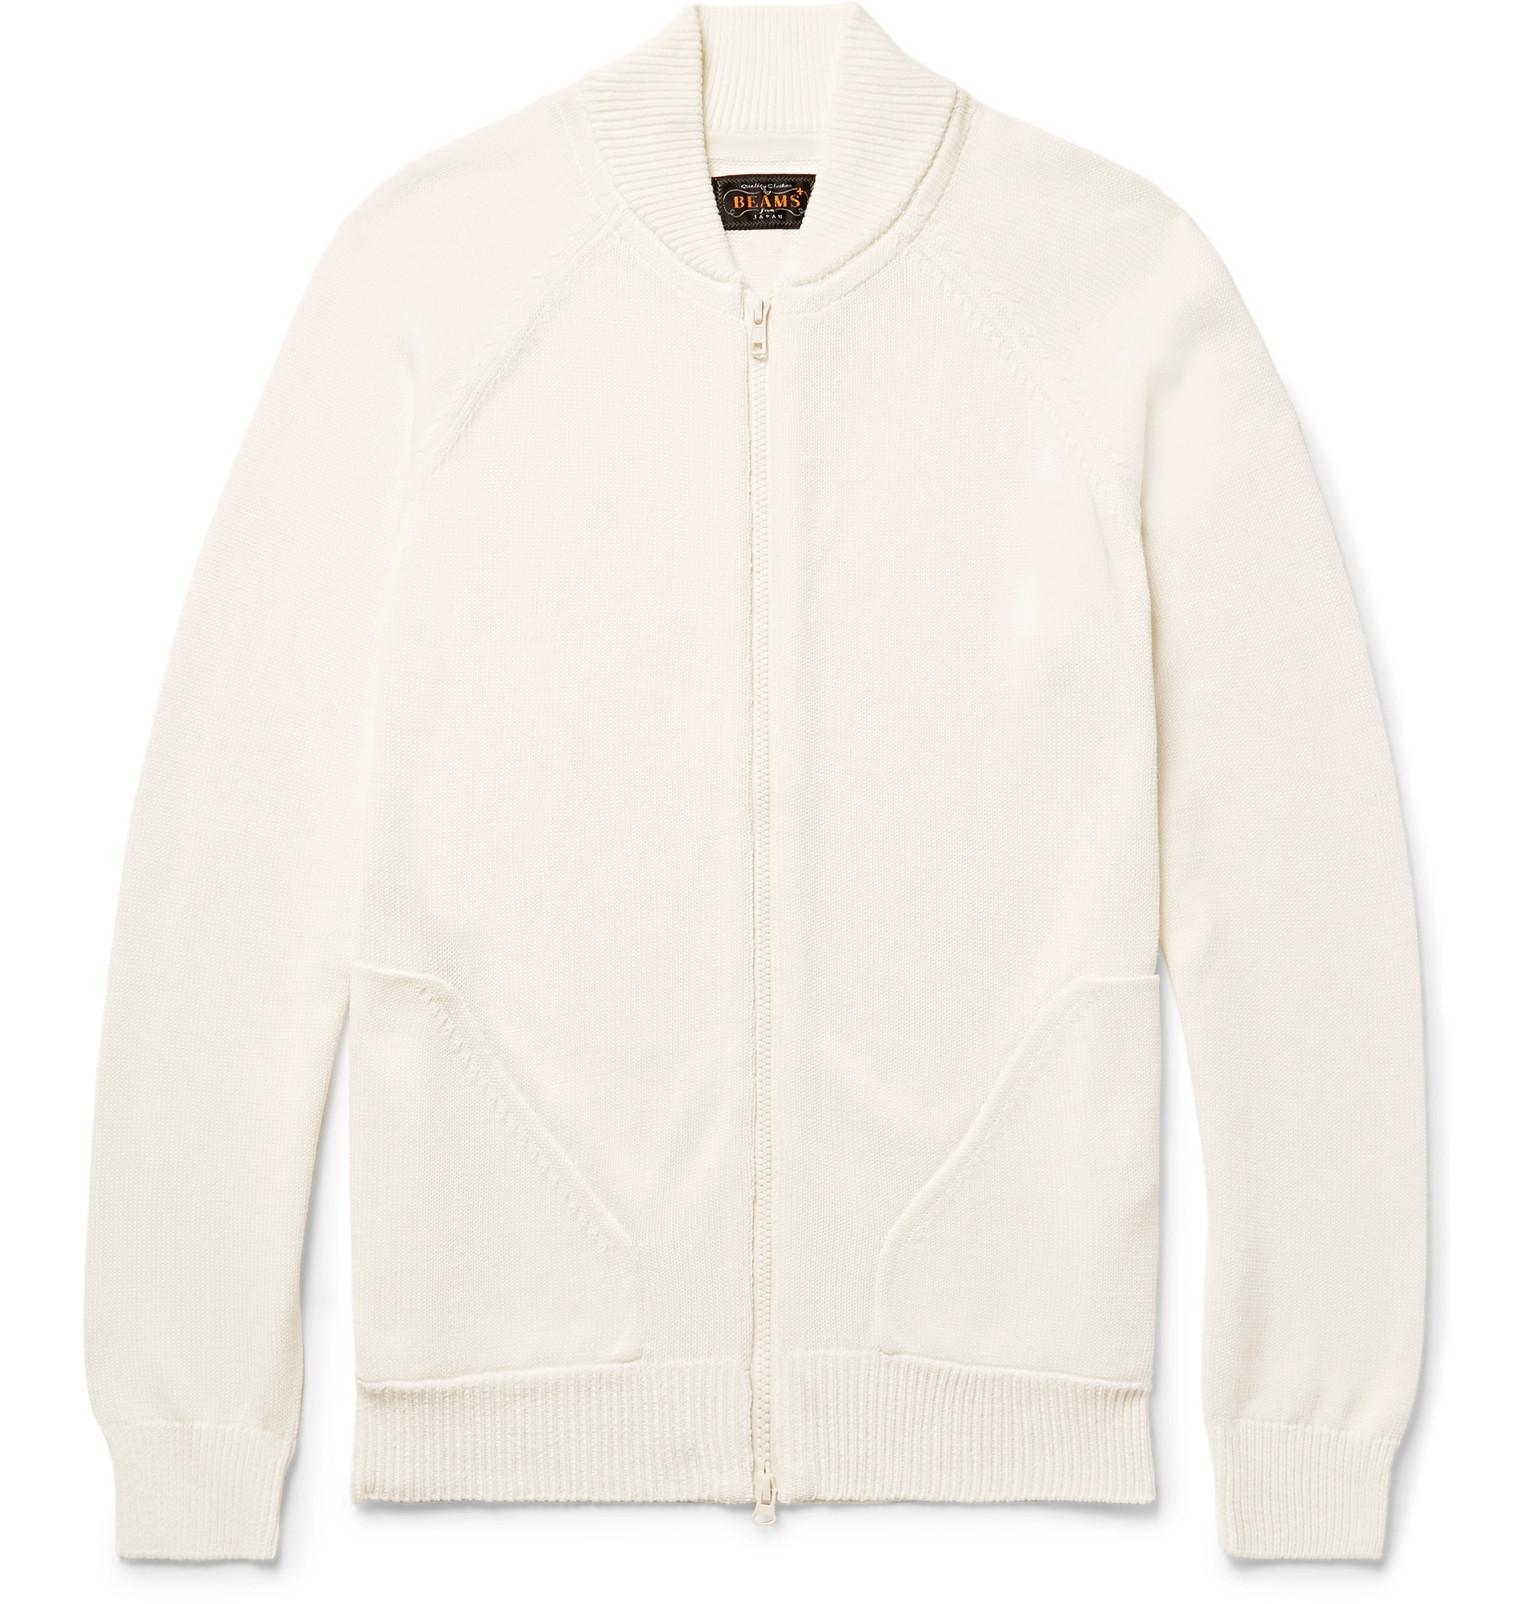 Beams Plus Cotton Zip-up Cardigan in White for Men - Lyst